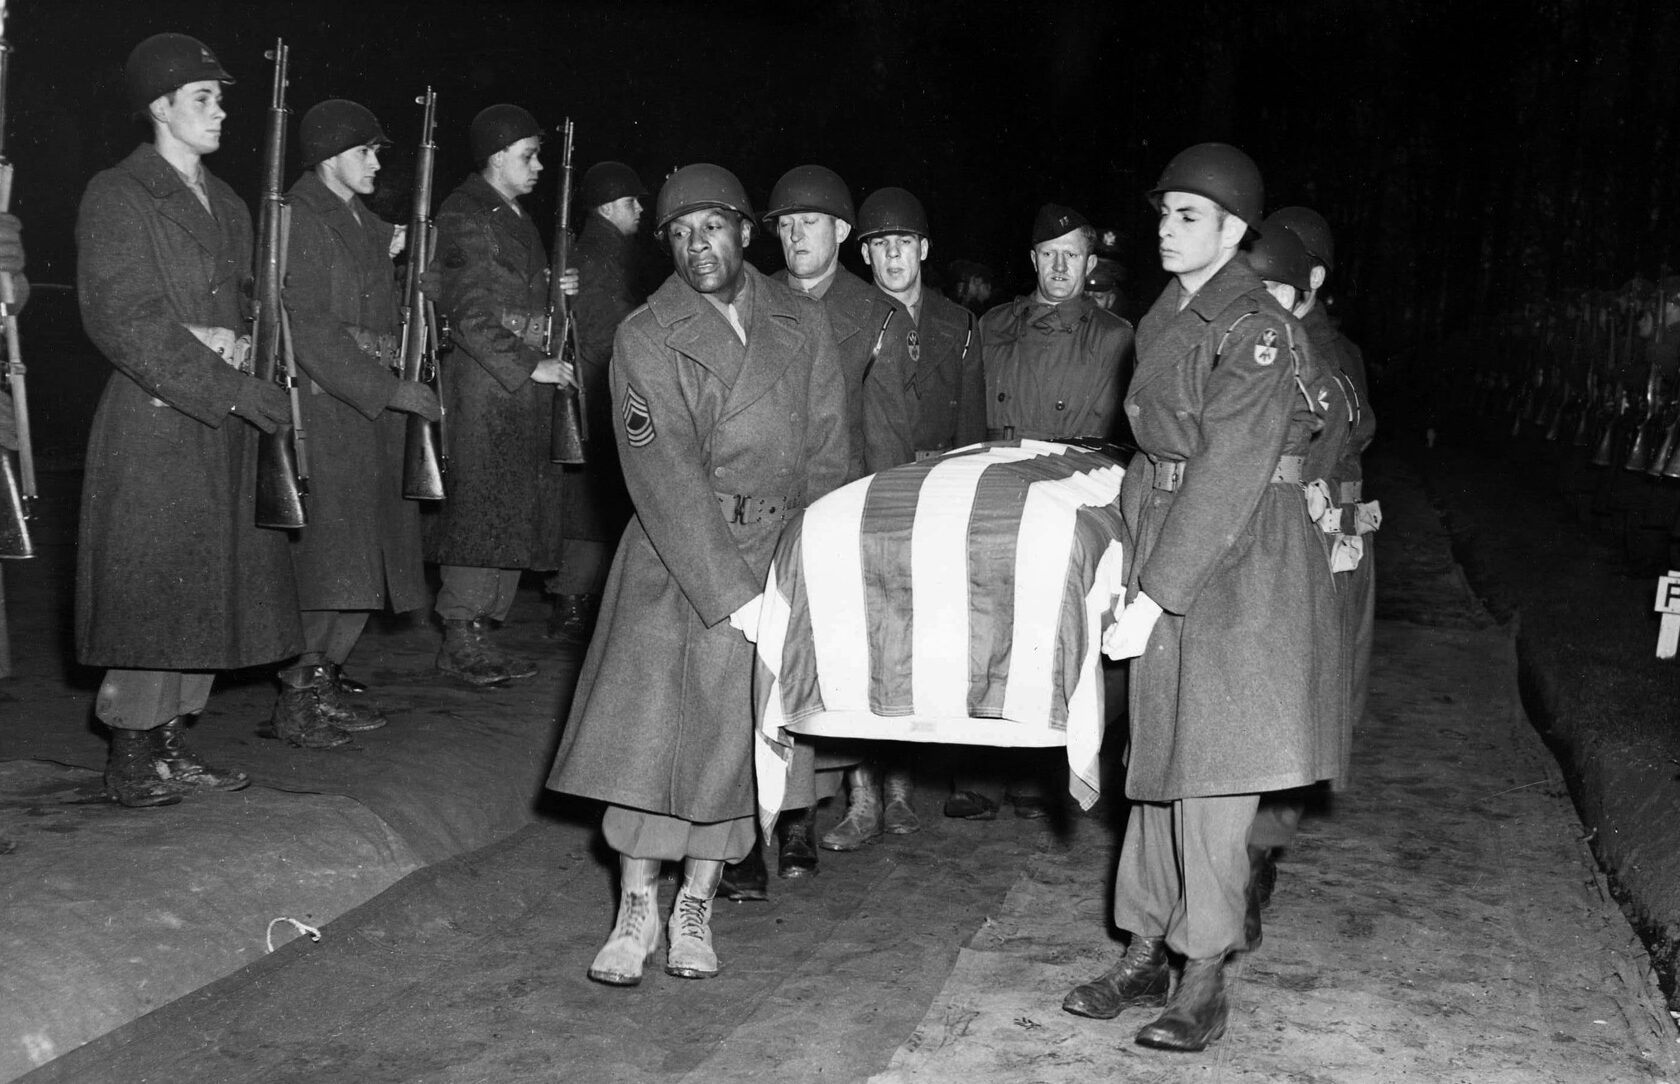 Pallbearers carry the casket of General George S. Patton to his burial plot on December 24, 1945.  During the funeral Bush marched behind a halftrack bearing Patton’s flag-draped casket on its way to the Hamm military cemetery in Luxembourg.